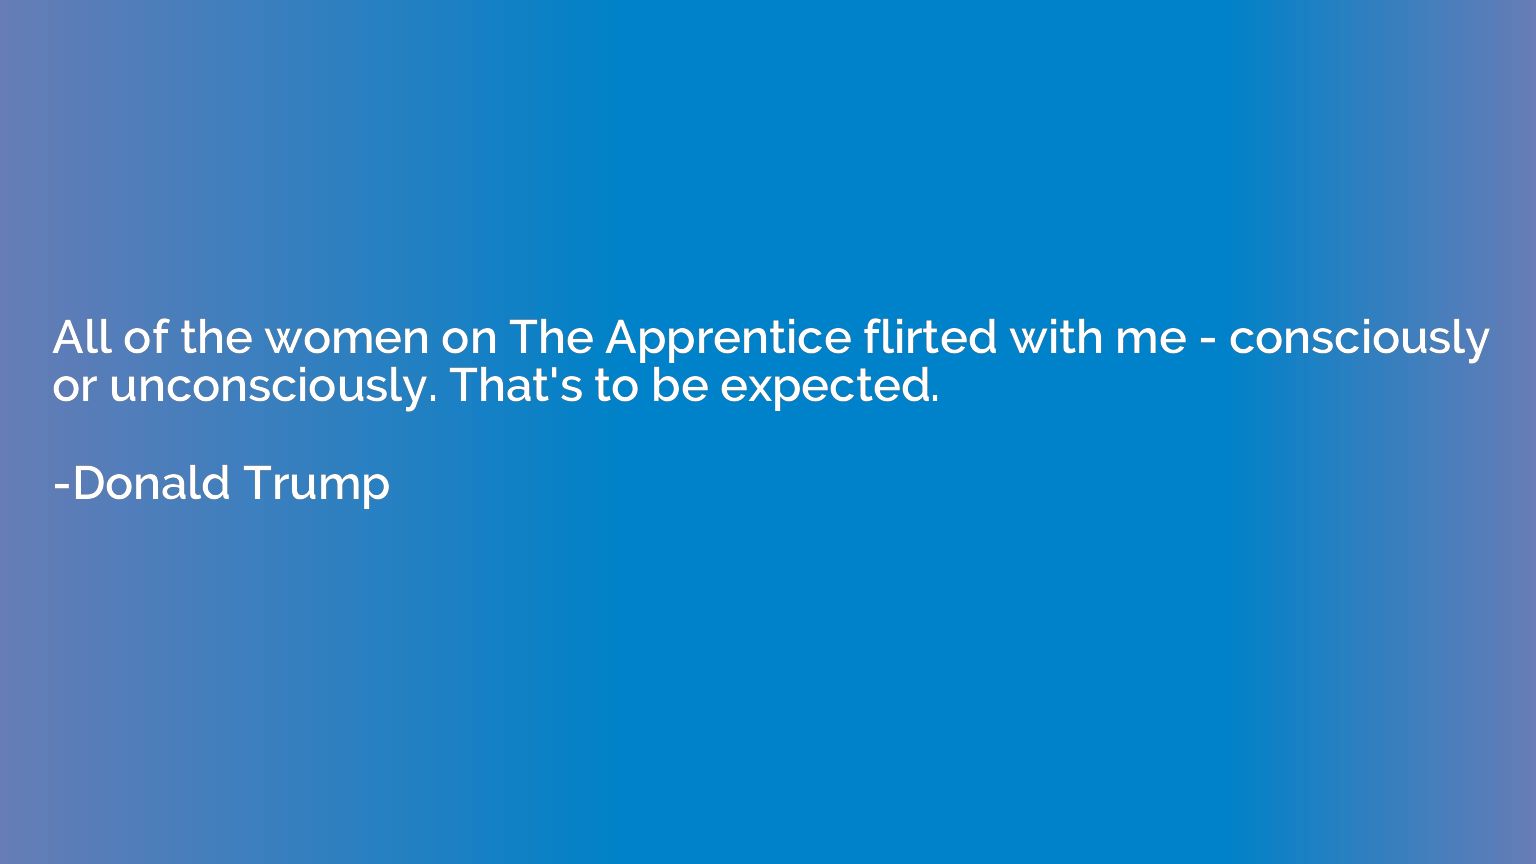 All of the women on The Apprentice flirted with me - conscio